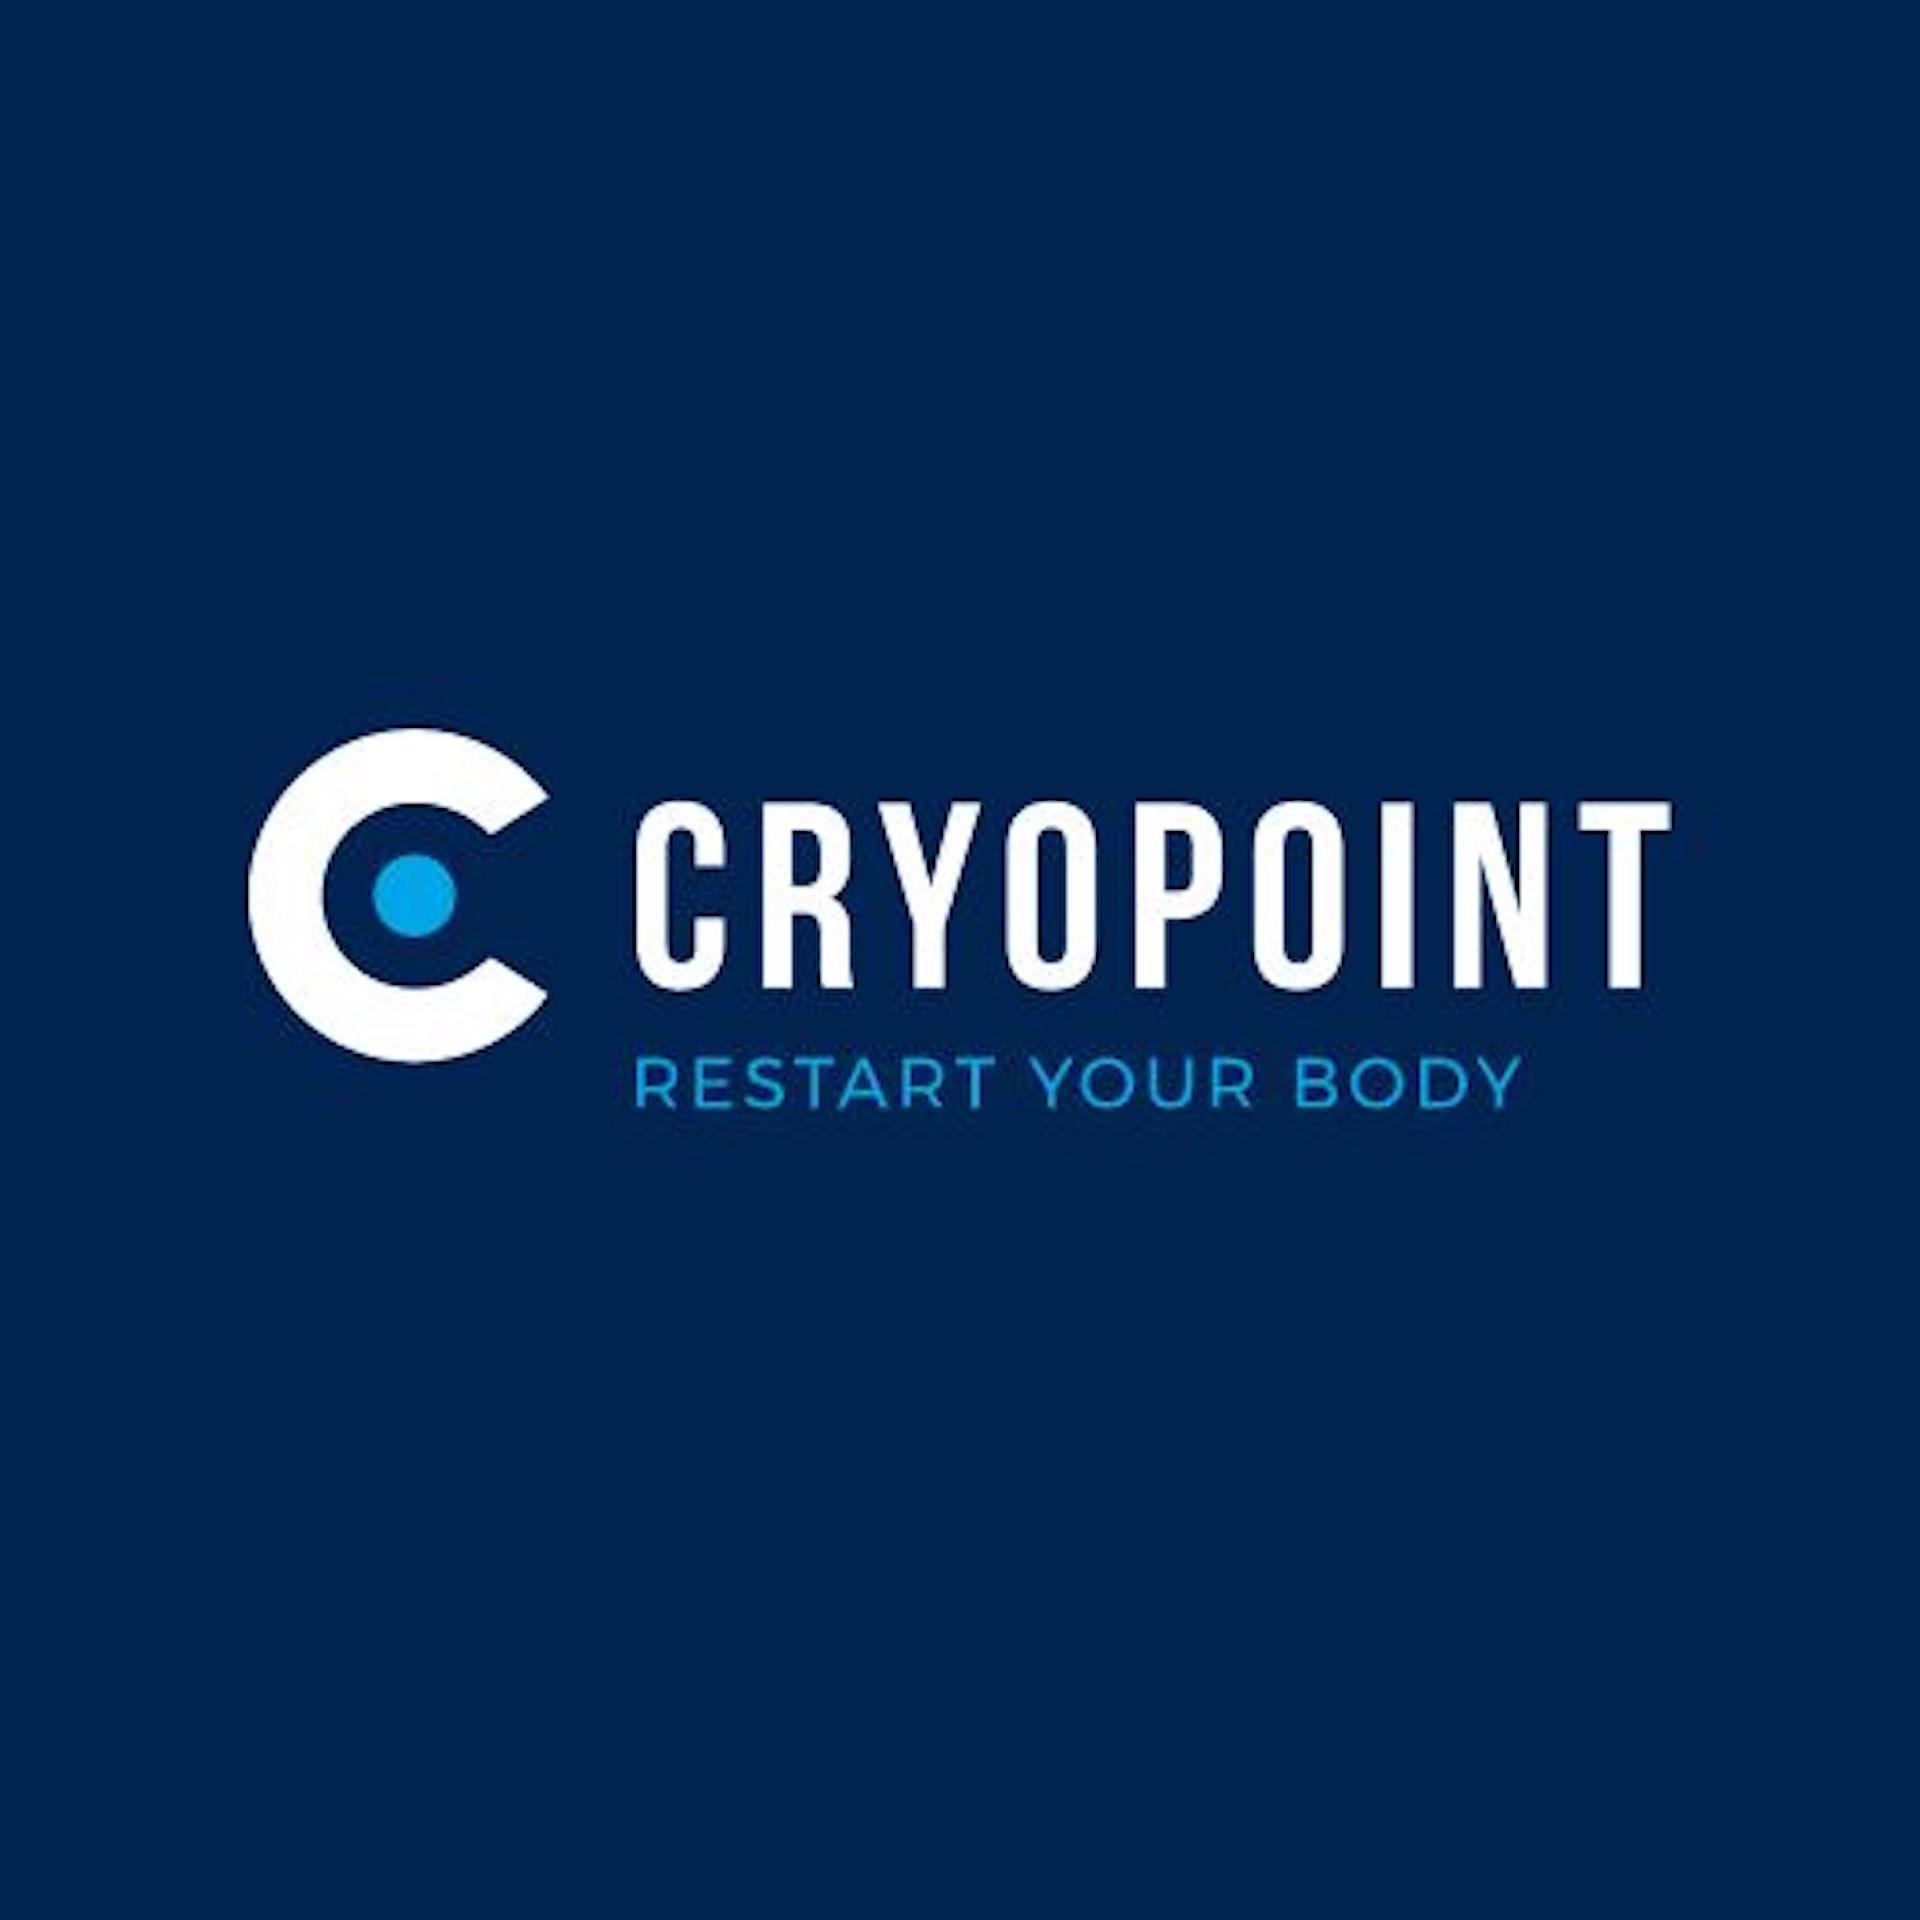 Cryopoint - Restart your body